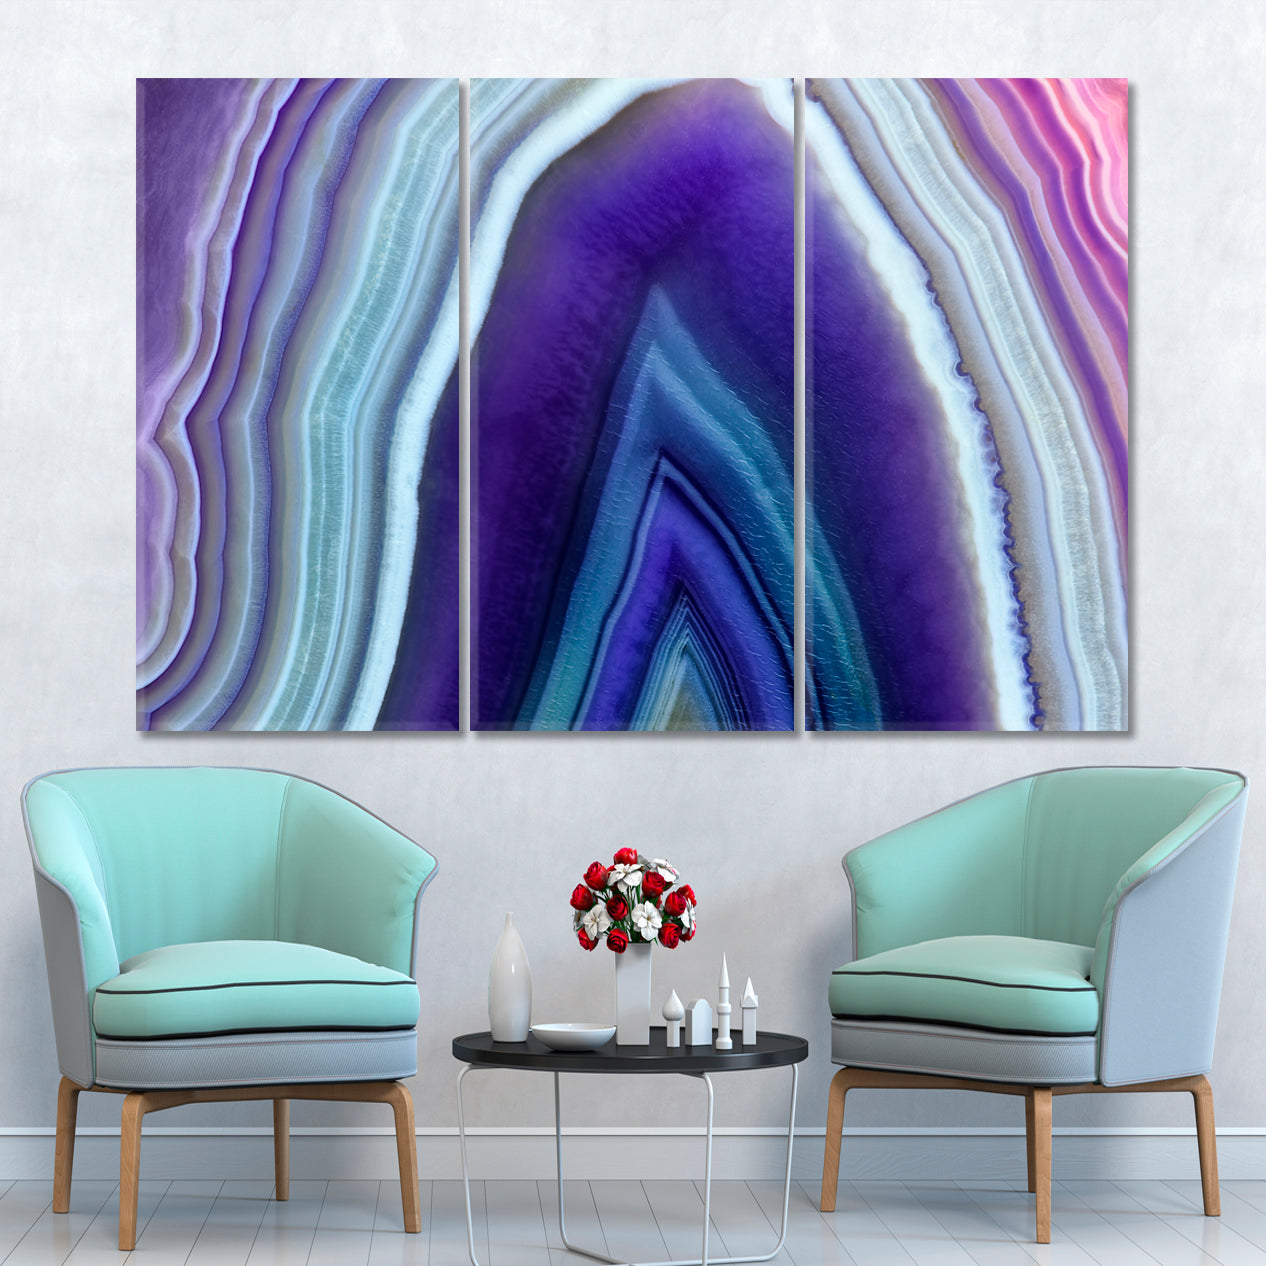 Amazing Violet Agate Crystal Cross Section Purple Abstract Structure Abstract Art Print Artesty 3 panels 36" x 24" 